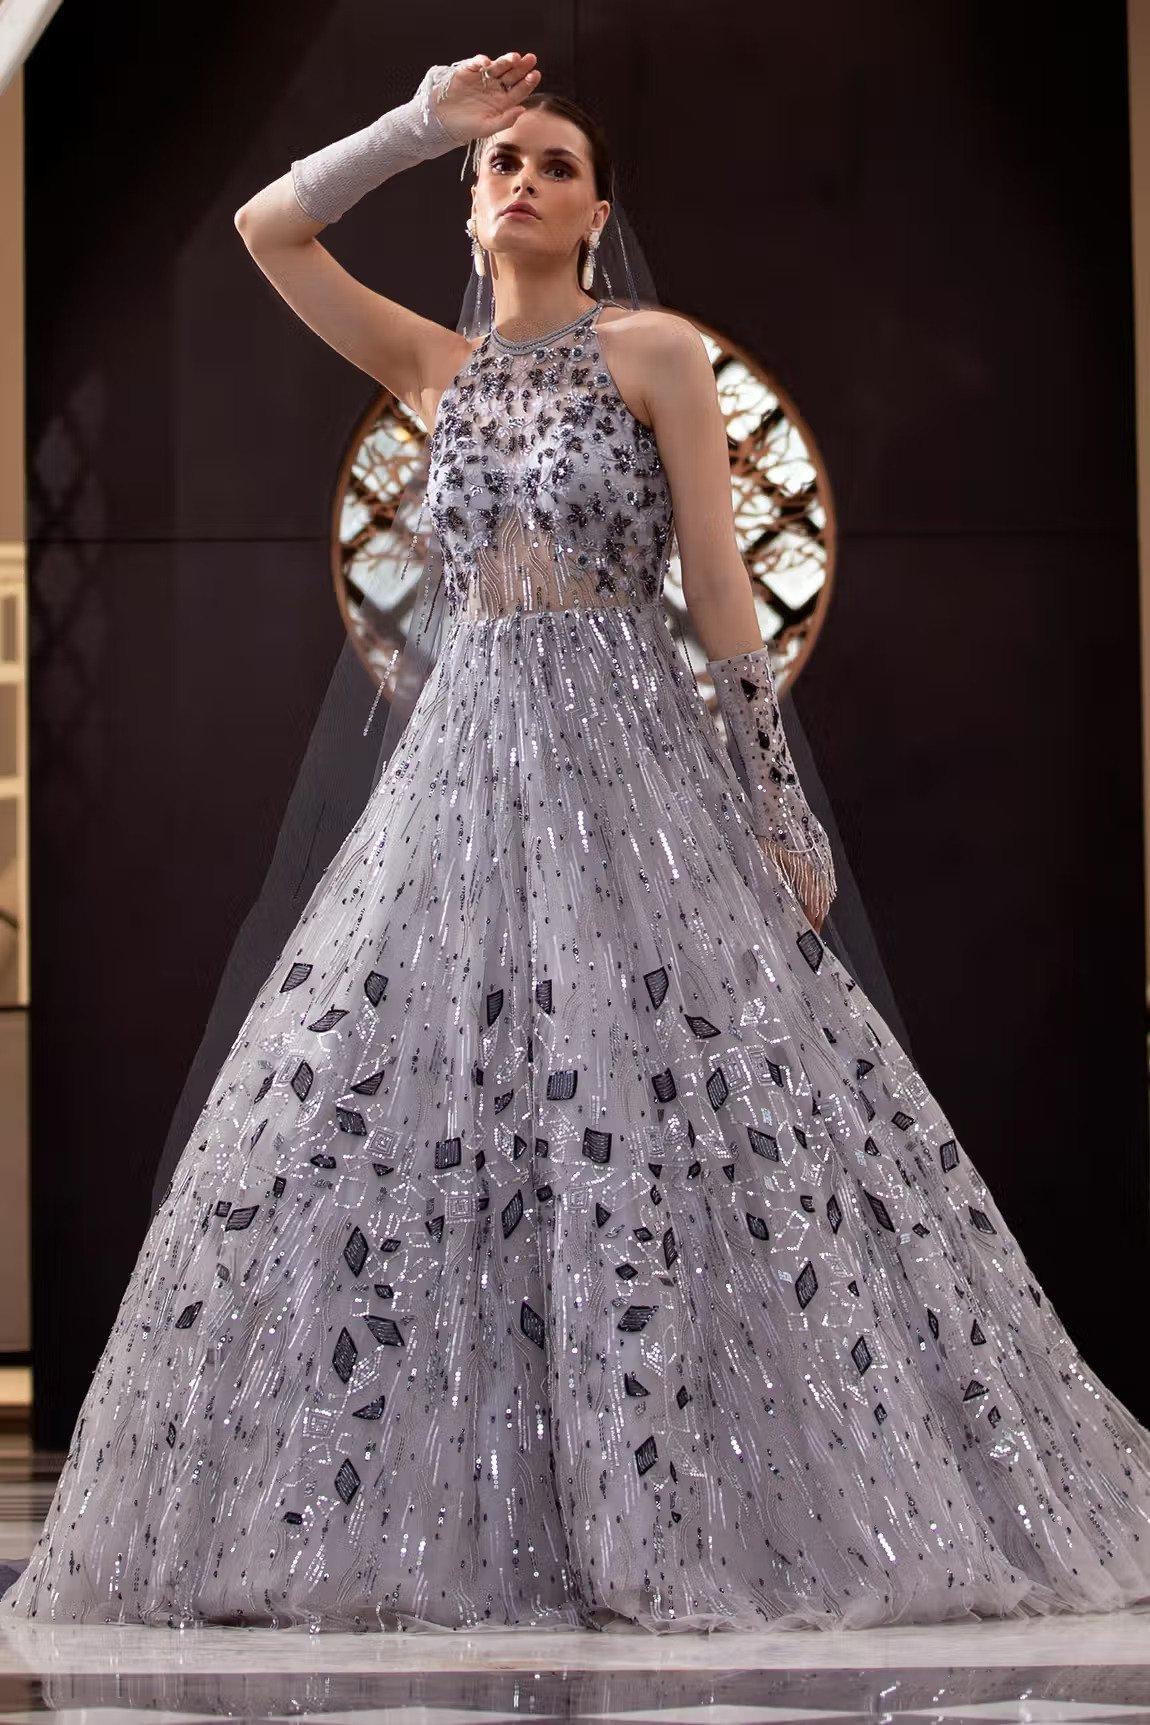 Silver Evening Gown (Look 30) from the Fall Winter 2018 / 2019 Couture  Collection by Zuhair Murad @zuhairmuradoff… | Evening gowns, Couture  dresses, Fashion dresses